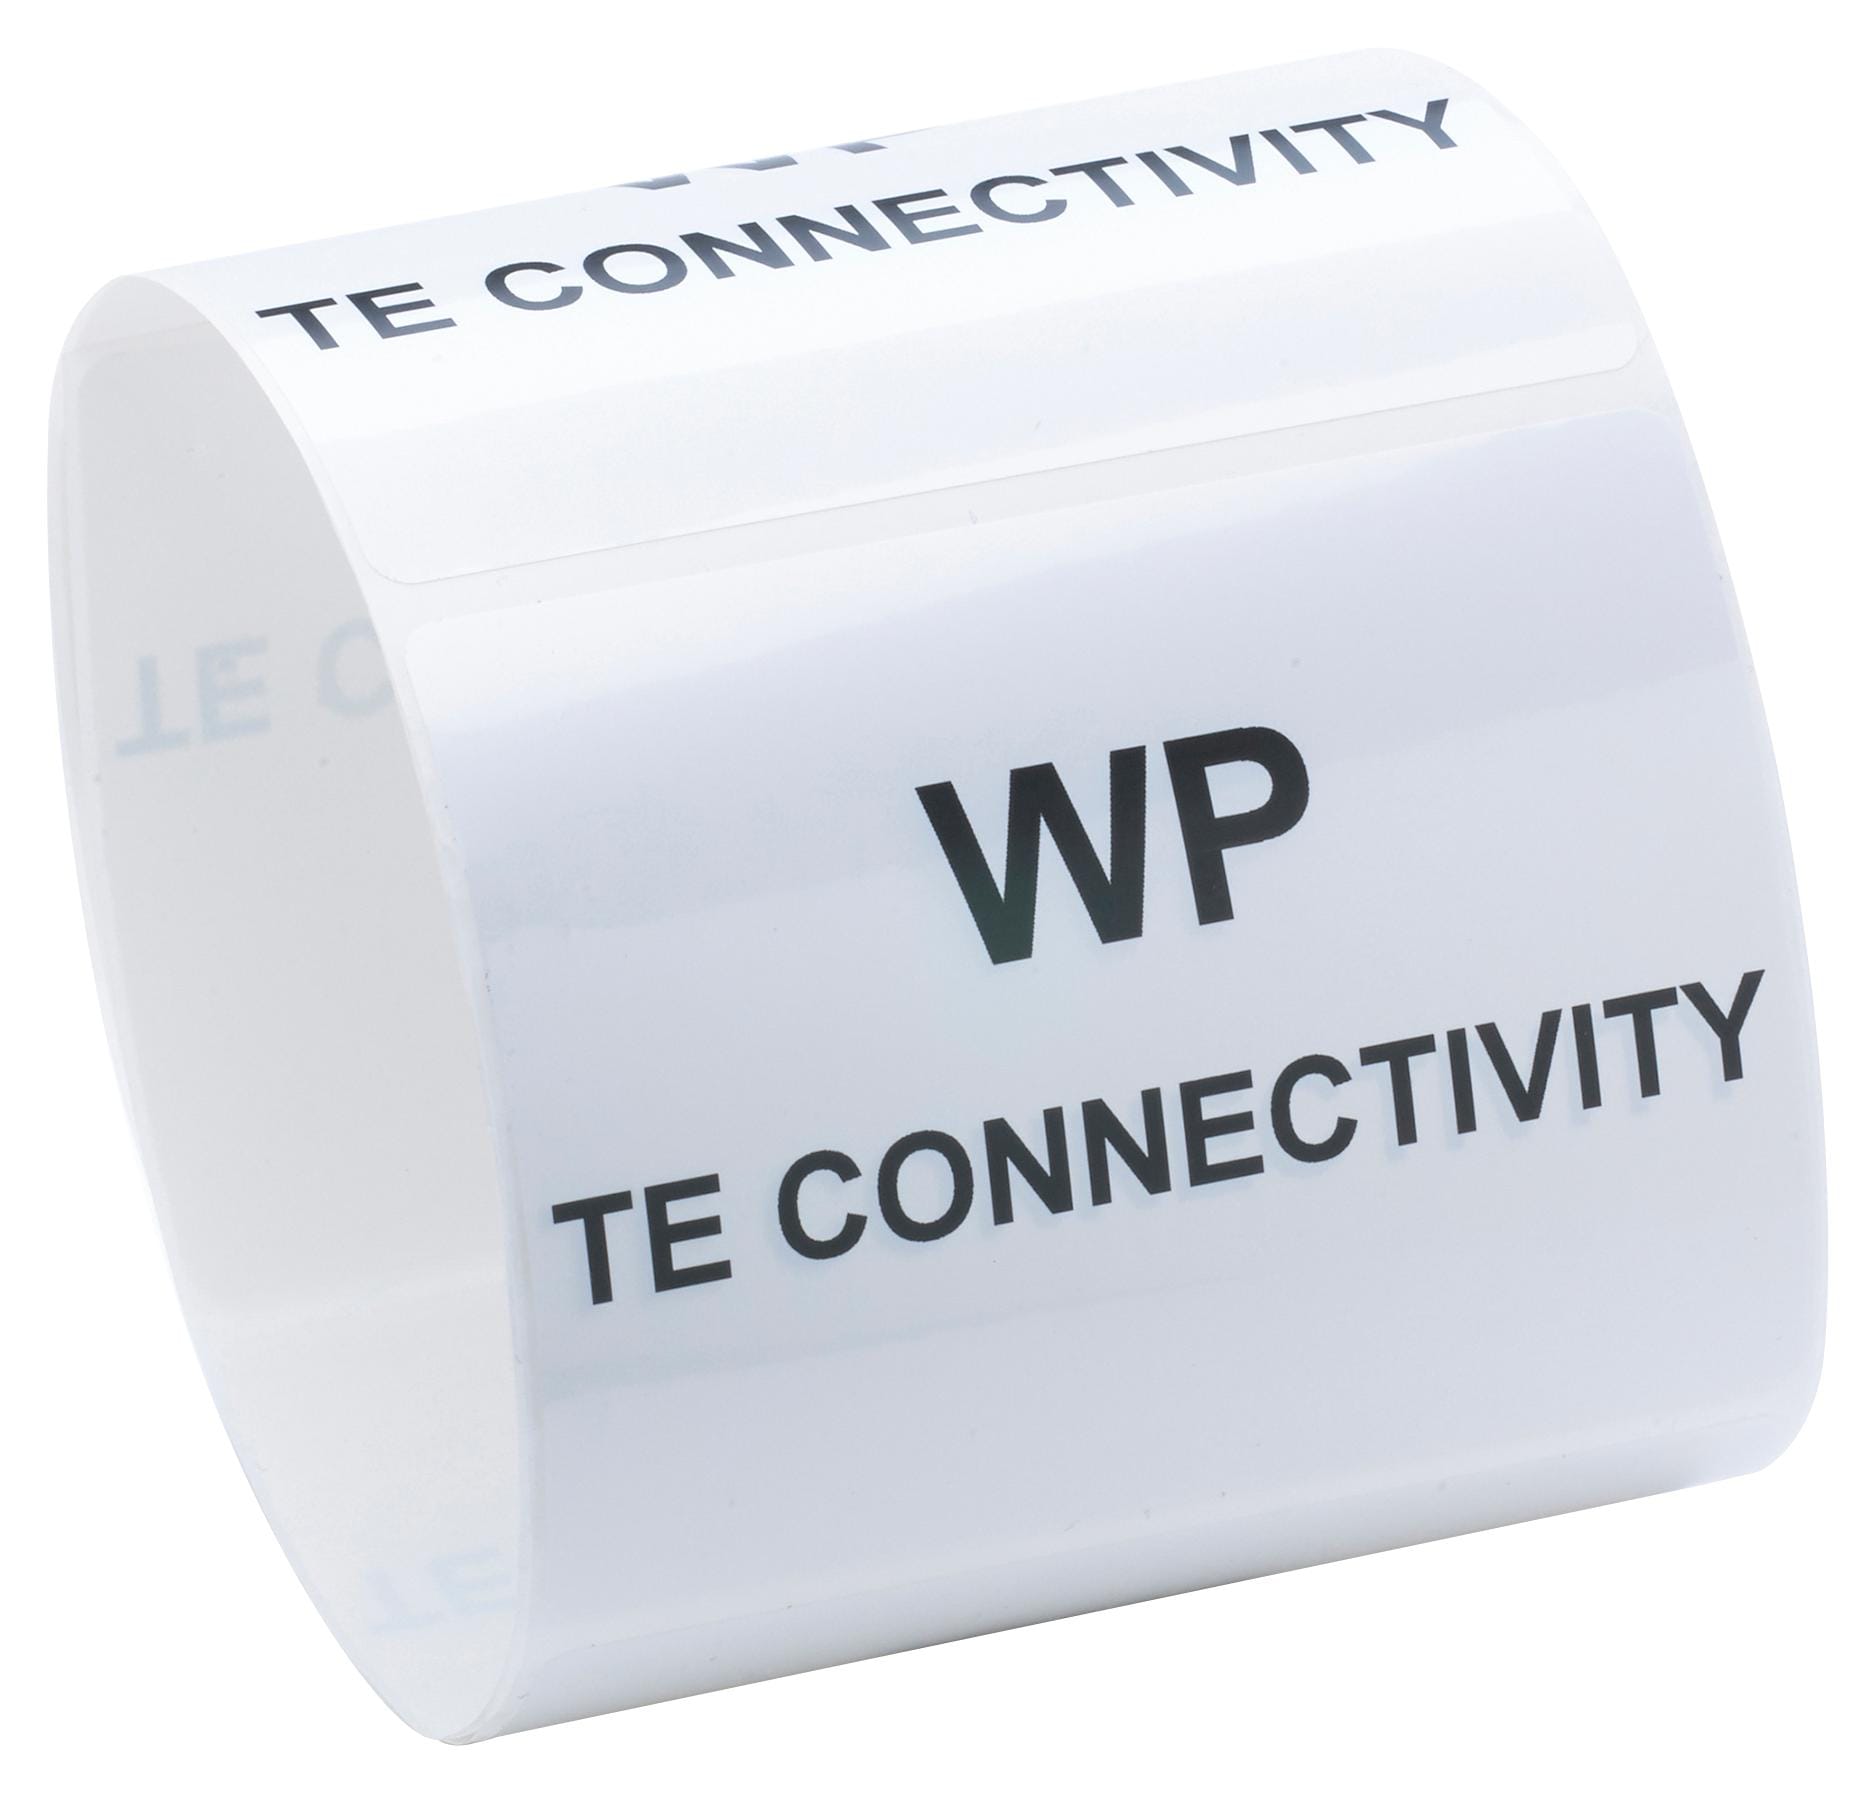 TE CONNECTIVITY Labels WP-101762-1.8-9 LABEL, POLYESTER, WHT, 76.2MM X 101.6MM TE CONNECTIVITY 2986524 WP-101762-1.8-9